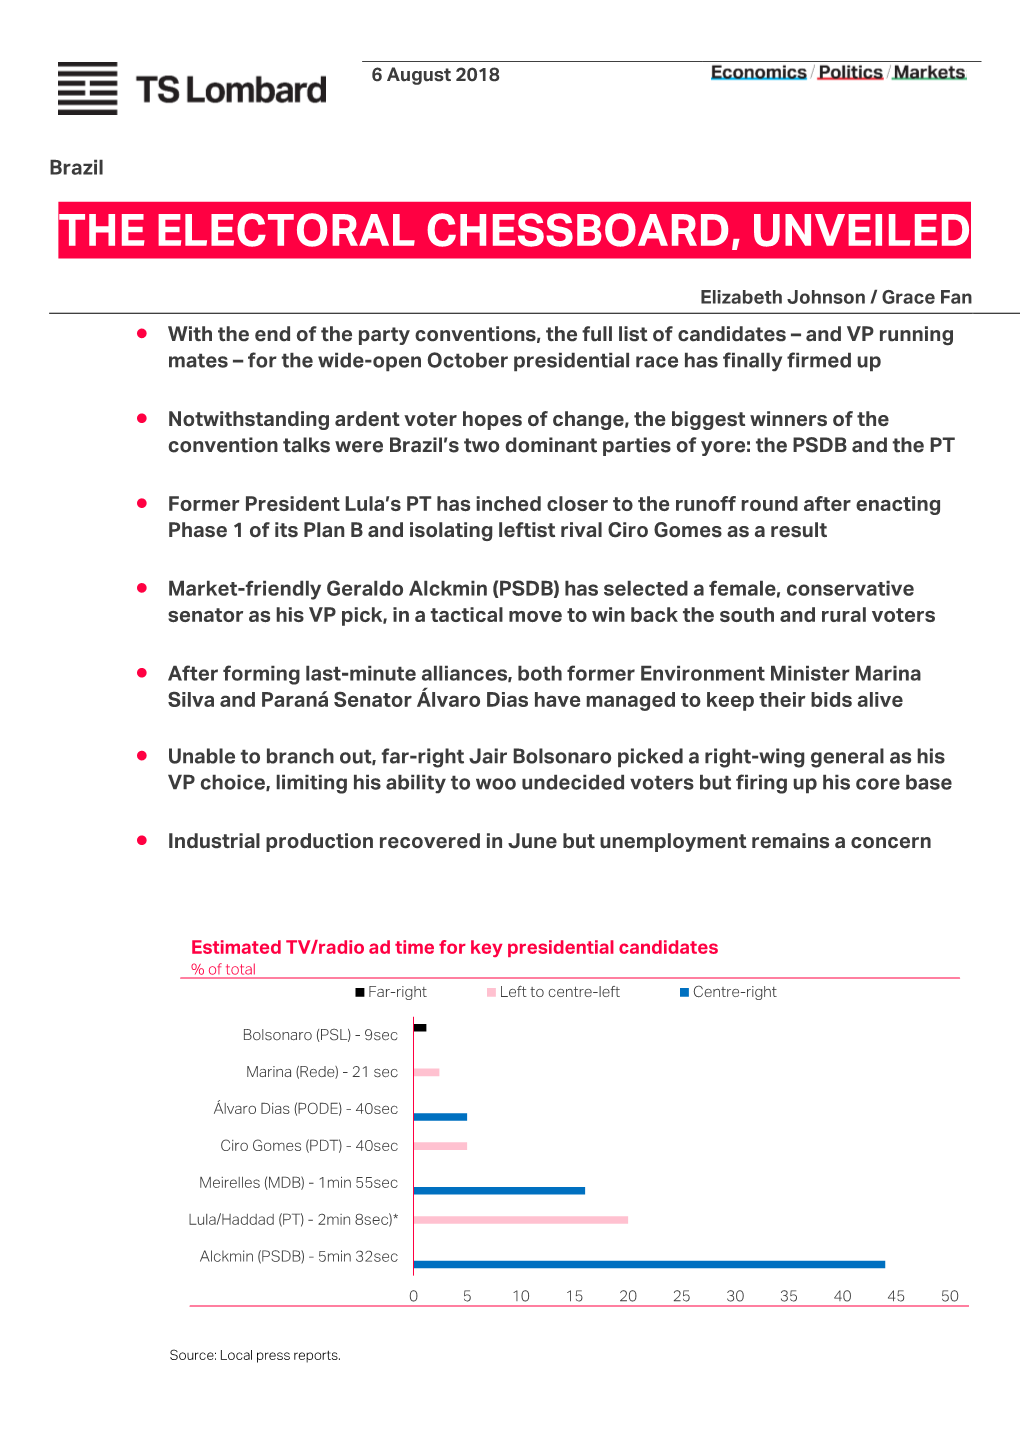 The Electoral Chessboard, Unveiled